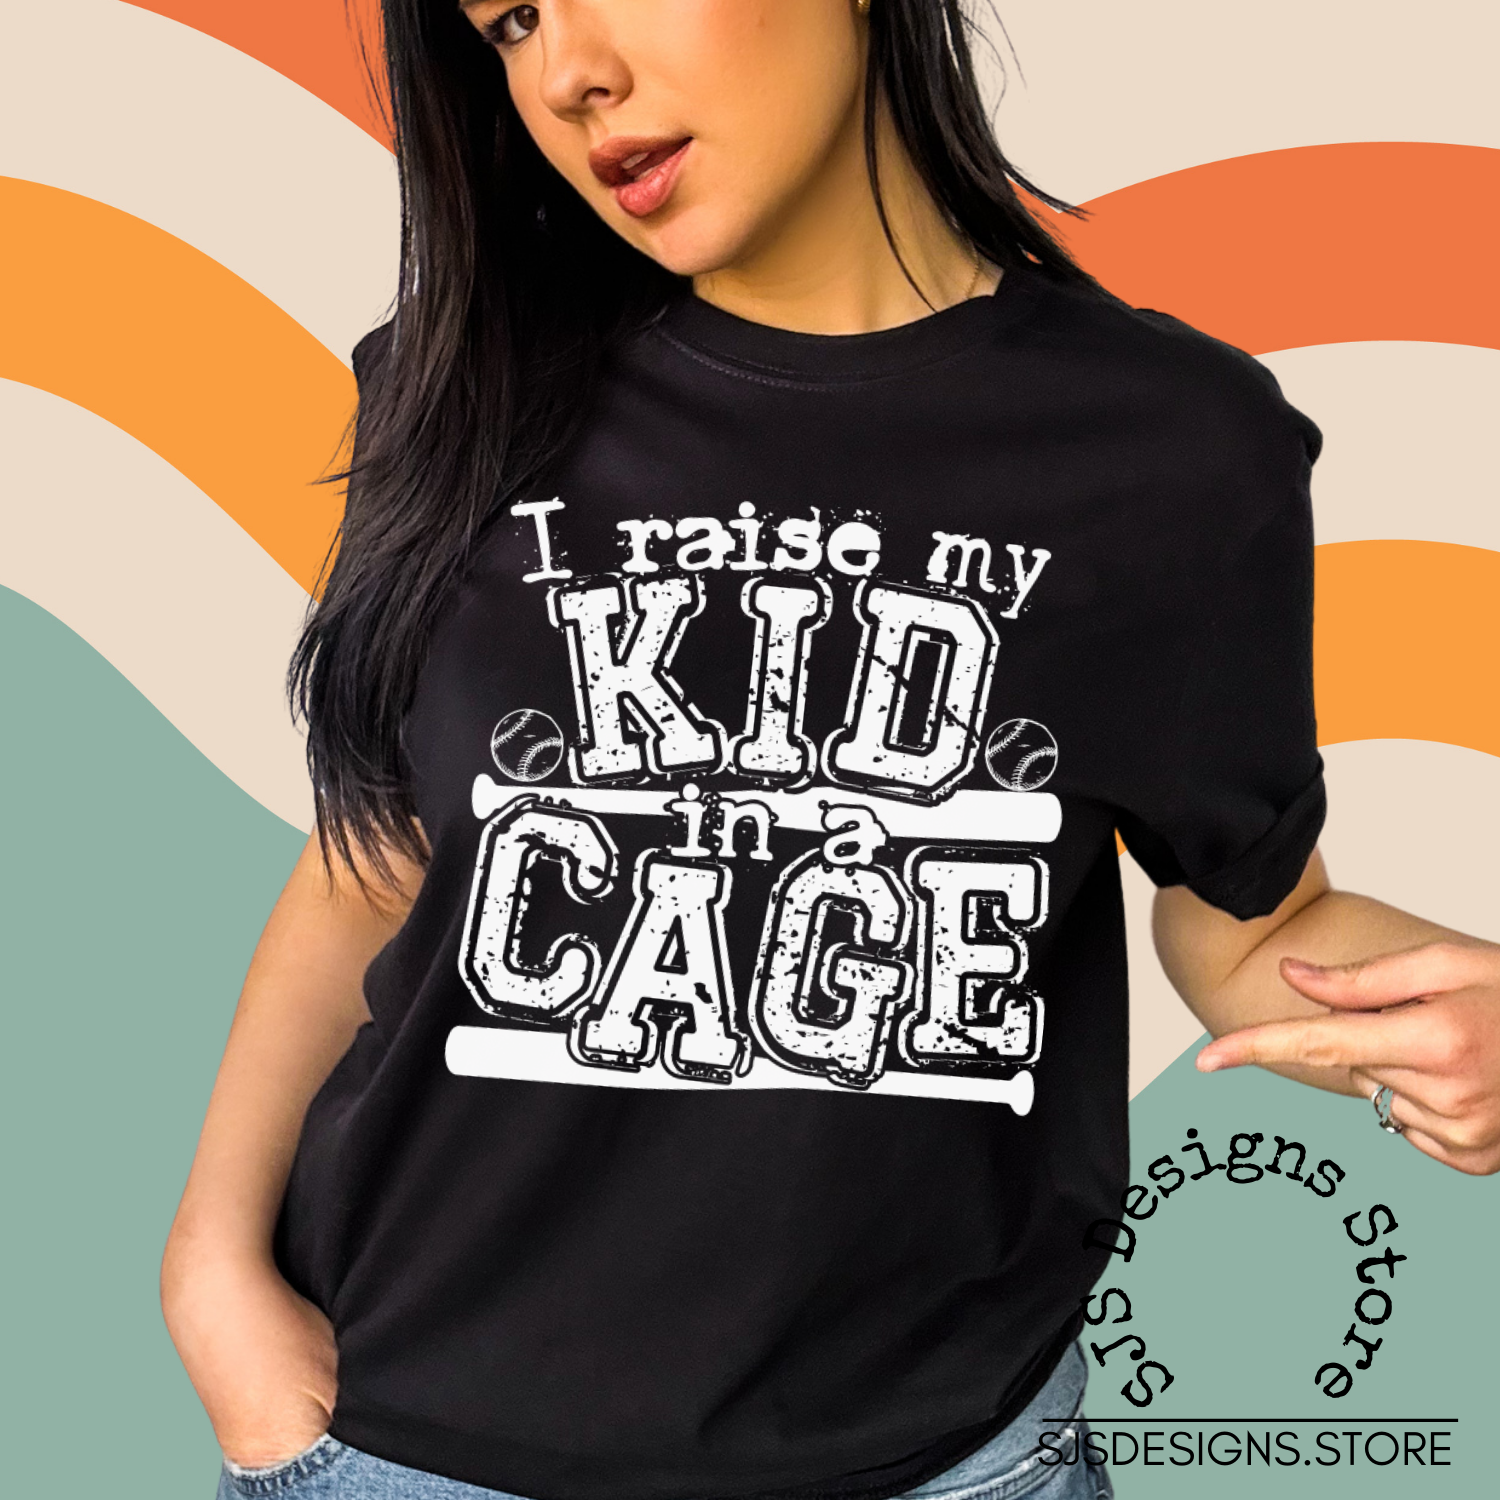 I Raise My Kid in a Cage Shirt